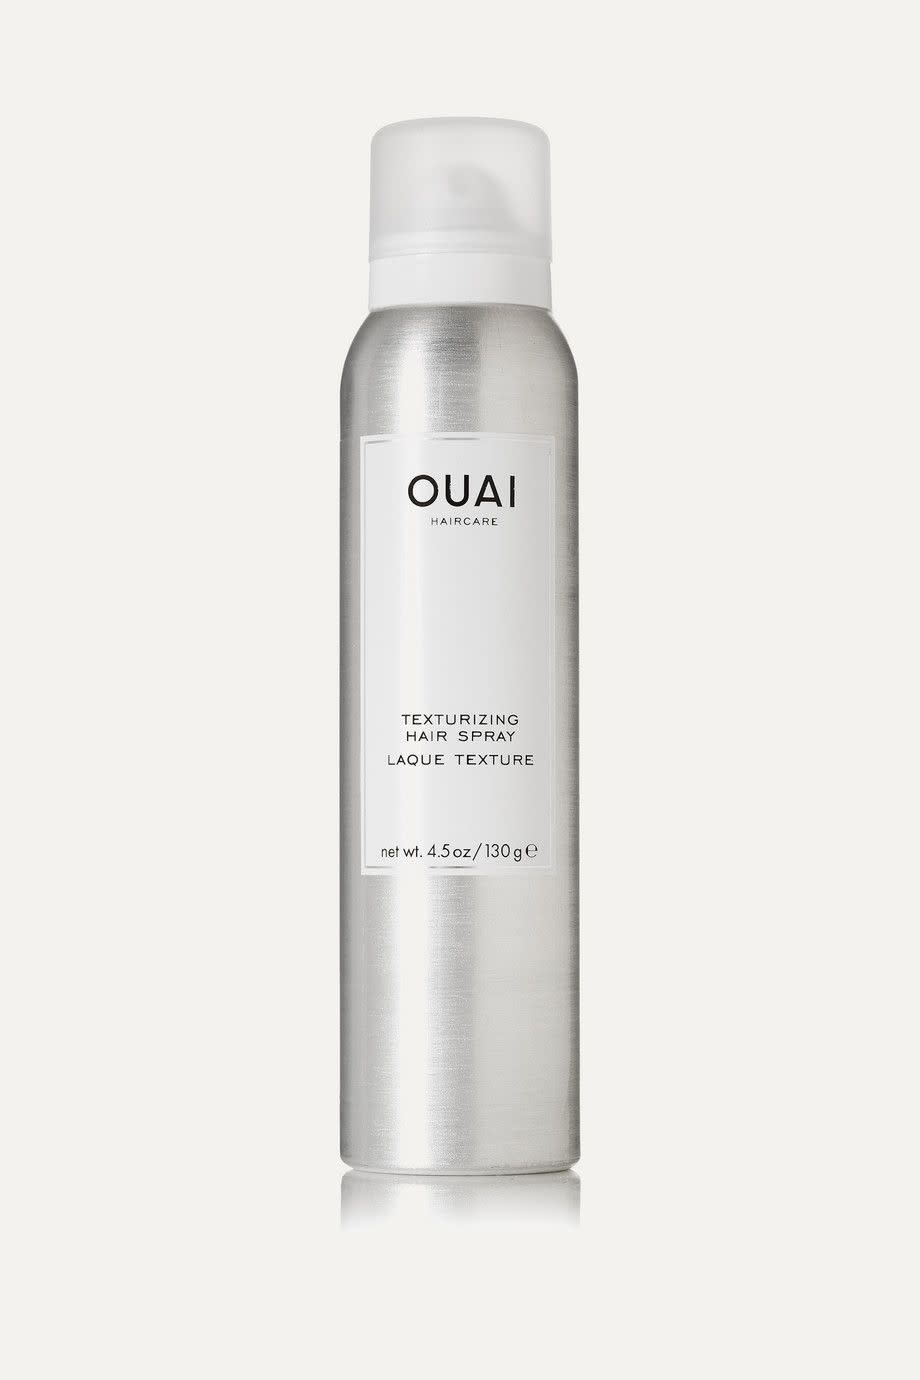 <p><strong>Ouai Haircare</strong></p><p>net-a-porter.com</p><p><strong>$26.00</strong></p><p><a href="https://go.redirectingat.com?id=74968X1596630&url=https%3A%2F%2Fwww.net-a-porter.com%2Fen-us%2Fshop%2Fproduct%2Fouai-haircare%2Ftexturizing-hair-spray-130g%2F766636&sref=https%3A%2F%2Fwww.cosmopolitan.com%2Fstyle-beauty%2Ffashion%2Fg24440615%2Froyal-family-fashion-hacks-style-tricks%2F" rel="nofollow noopener" target="_blank" data-ylk="slk:Shop Now" class="link ">Shop Now</a></p><p>Crunchy hair is sooo '80s. For a strong hold that feels natural and soft, try this option from Jen Atkin's line Ouai.</p>